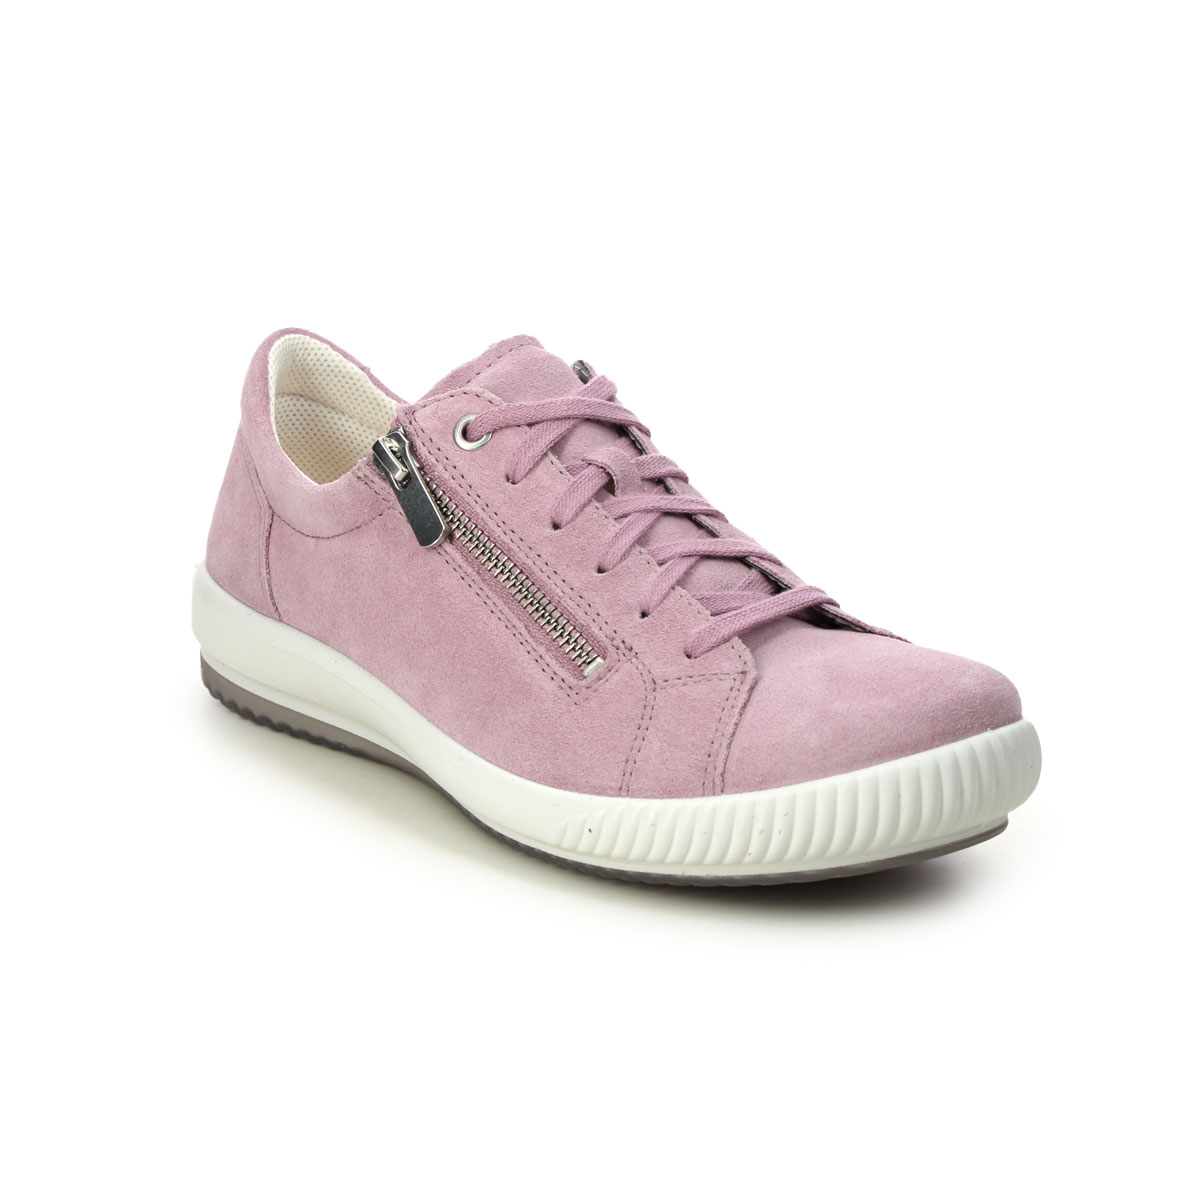 Legero Tanaro 5 Zip Pink suede Womens lacing shoes 2001162-5640 in a Plain Leather in Size 3.5